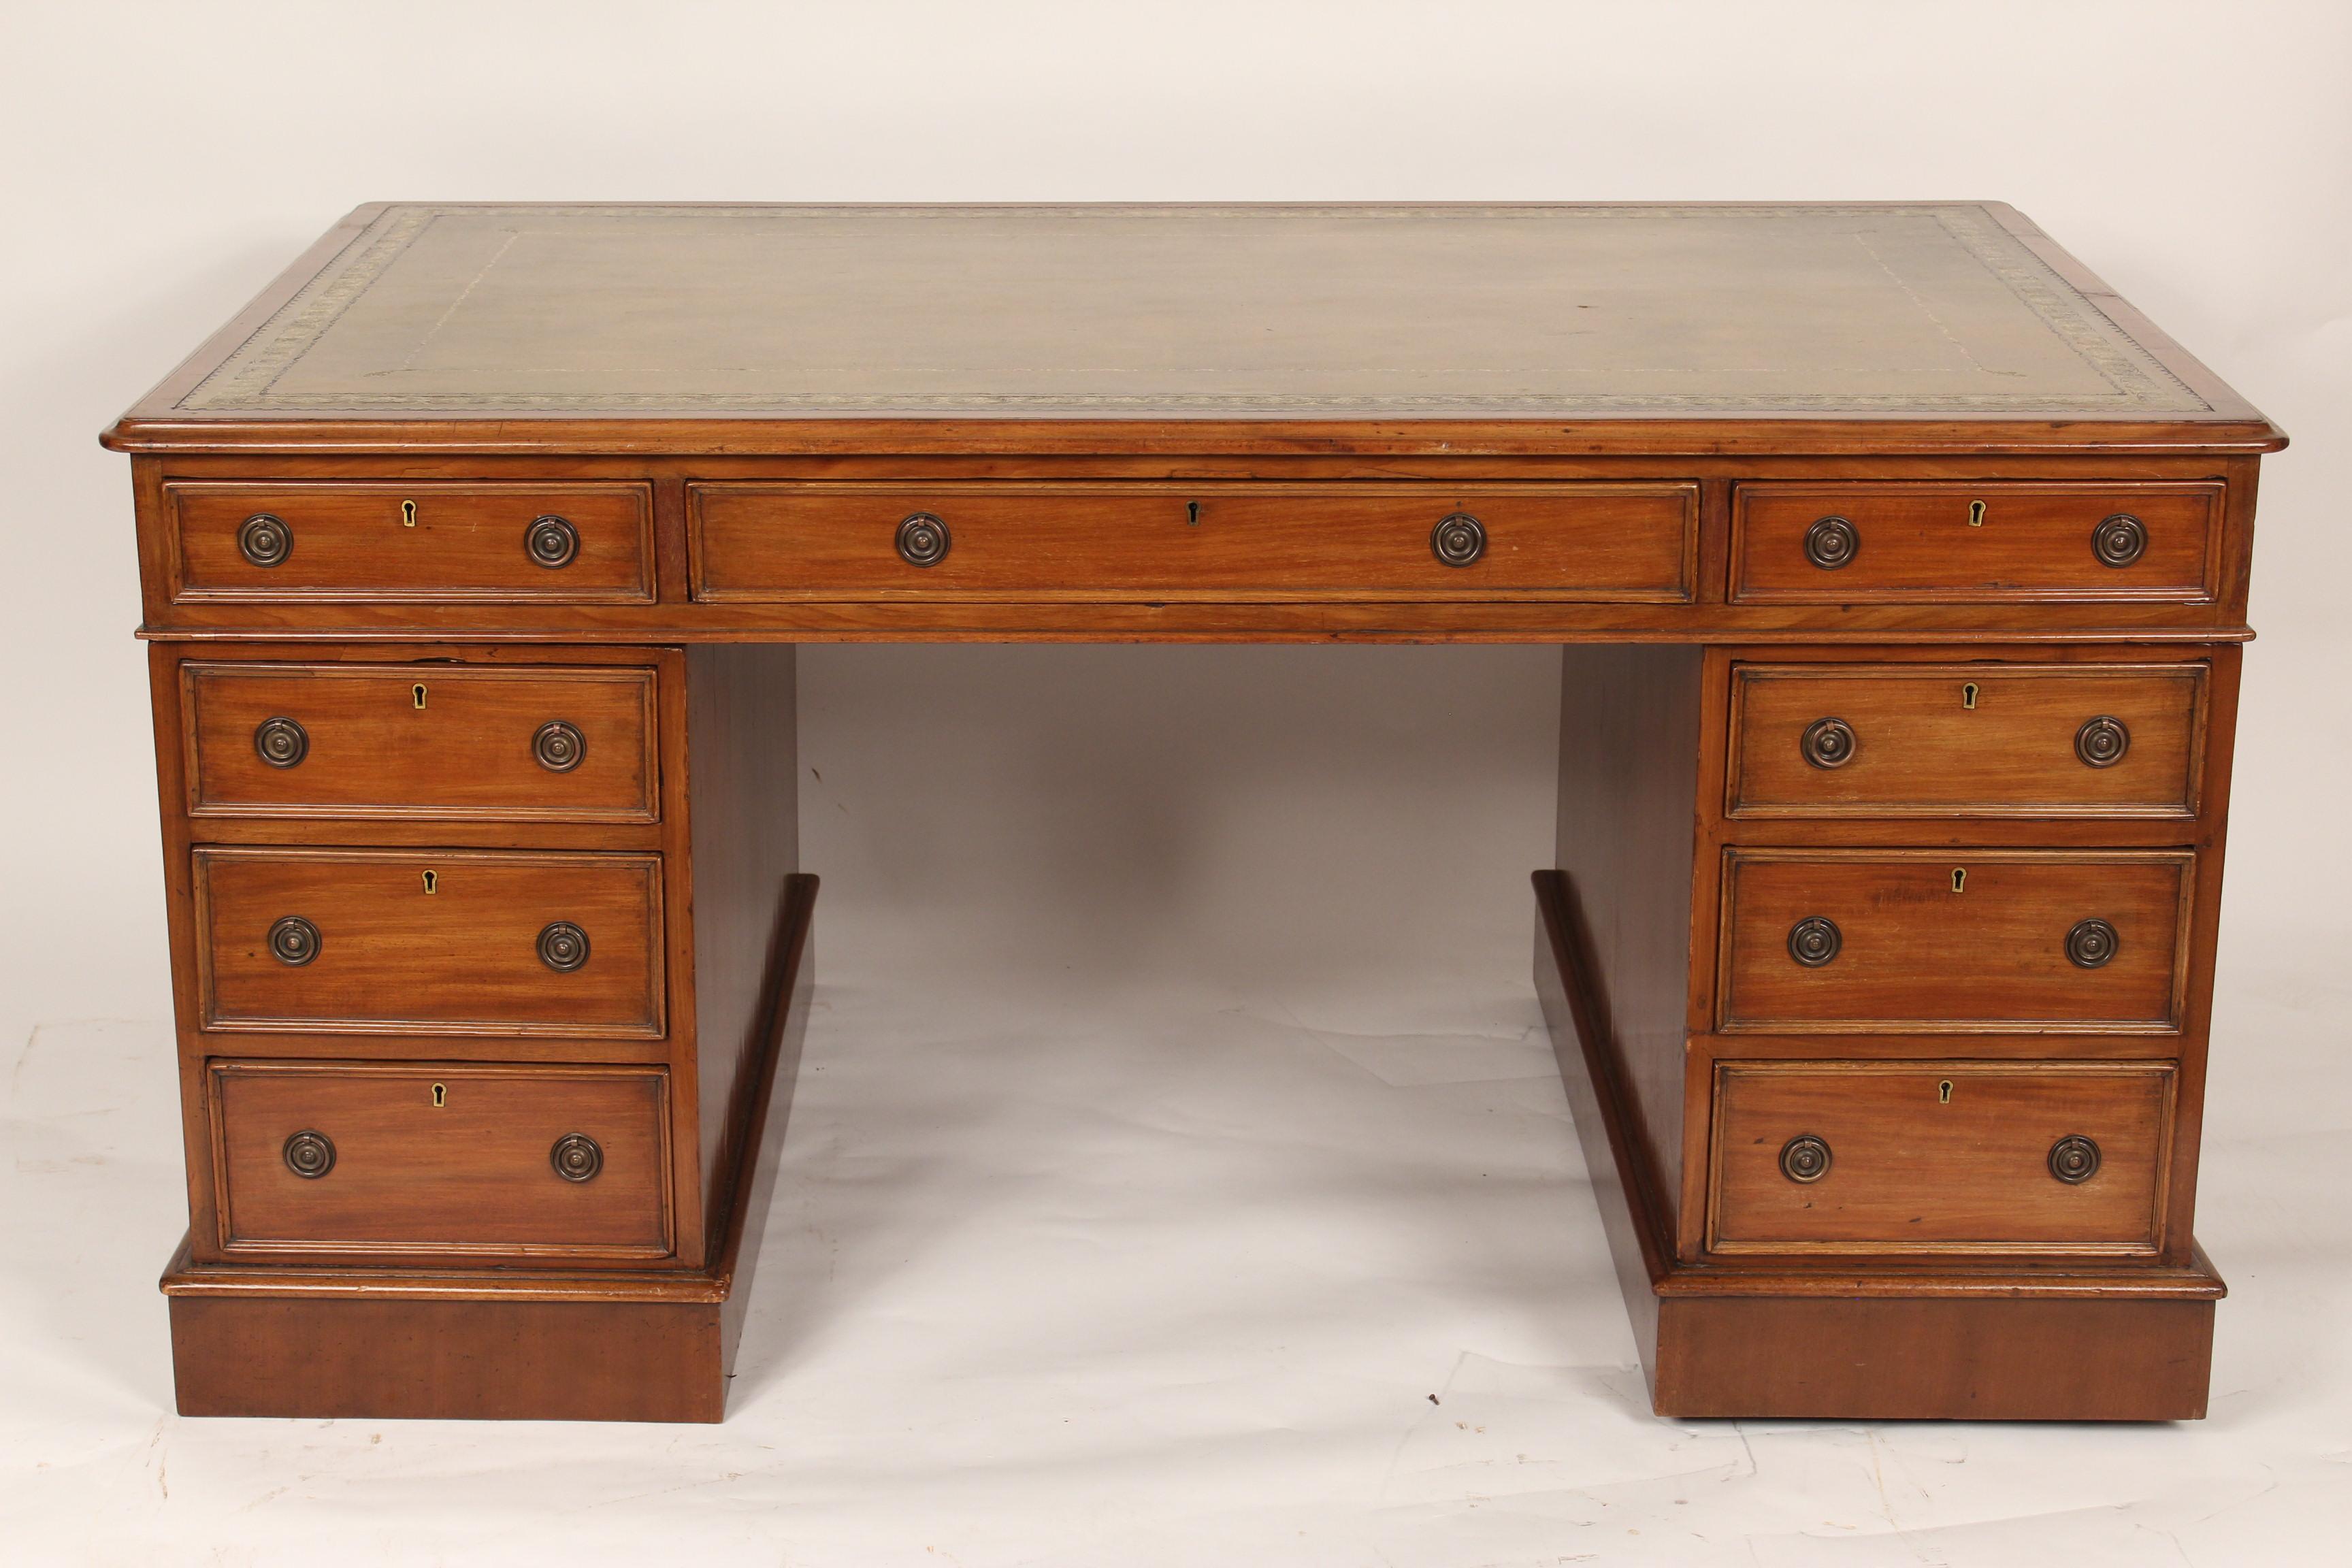 Antique George III style mahogany partners desk with tooled leather top, circa 1890-1910. With drawers on the front side and drawers and doors on the back side. The left and right hand drawers open and close on the back side the center drawer is